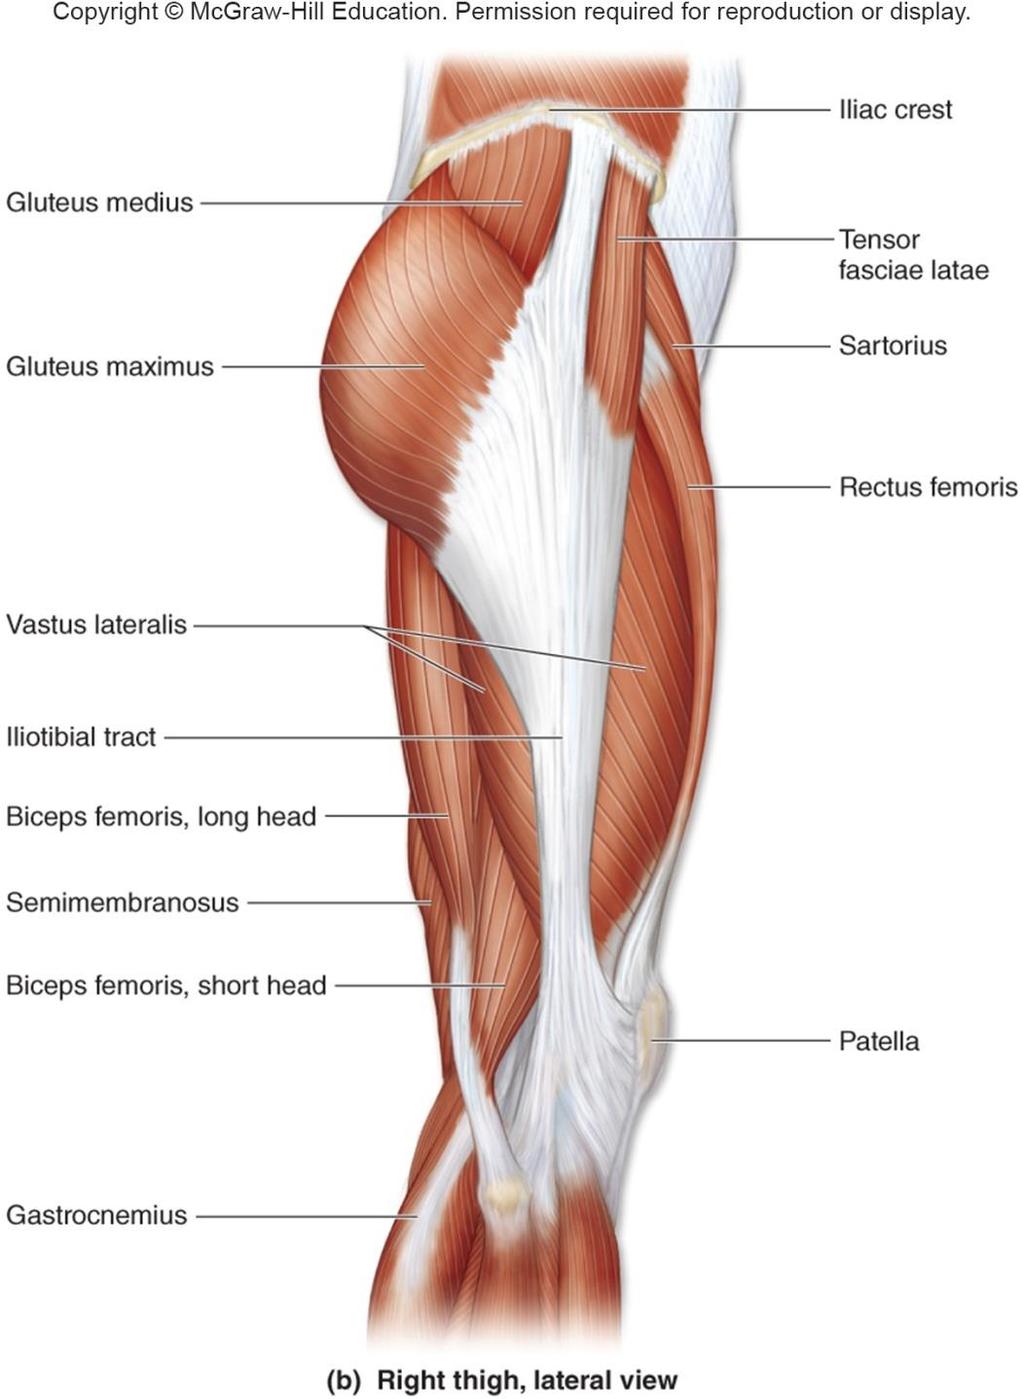 Muscles That Act on the